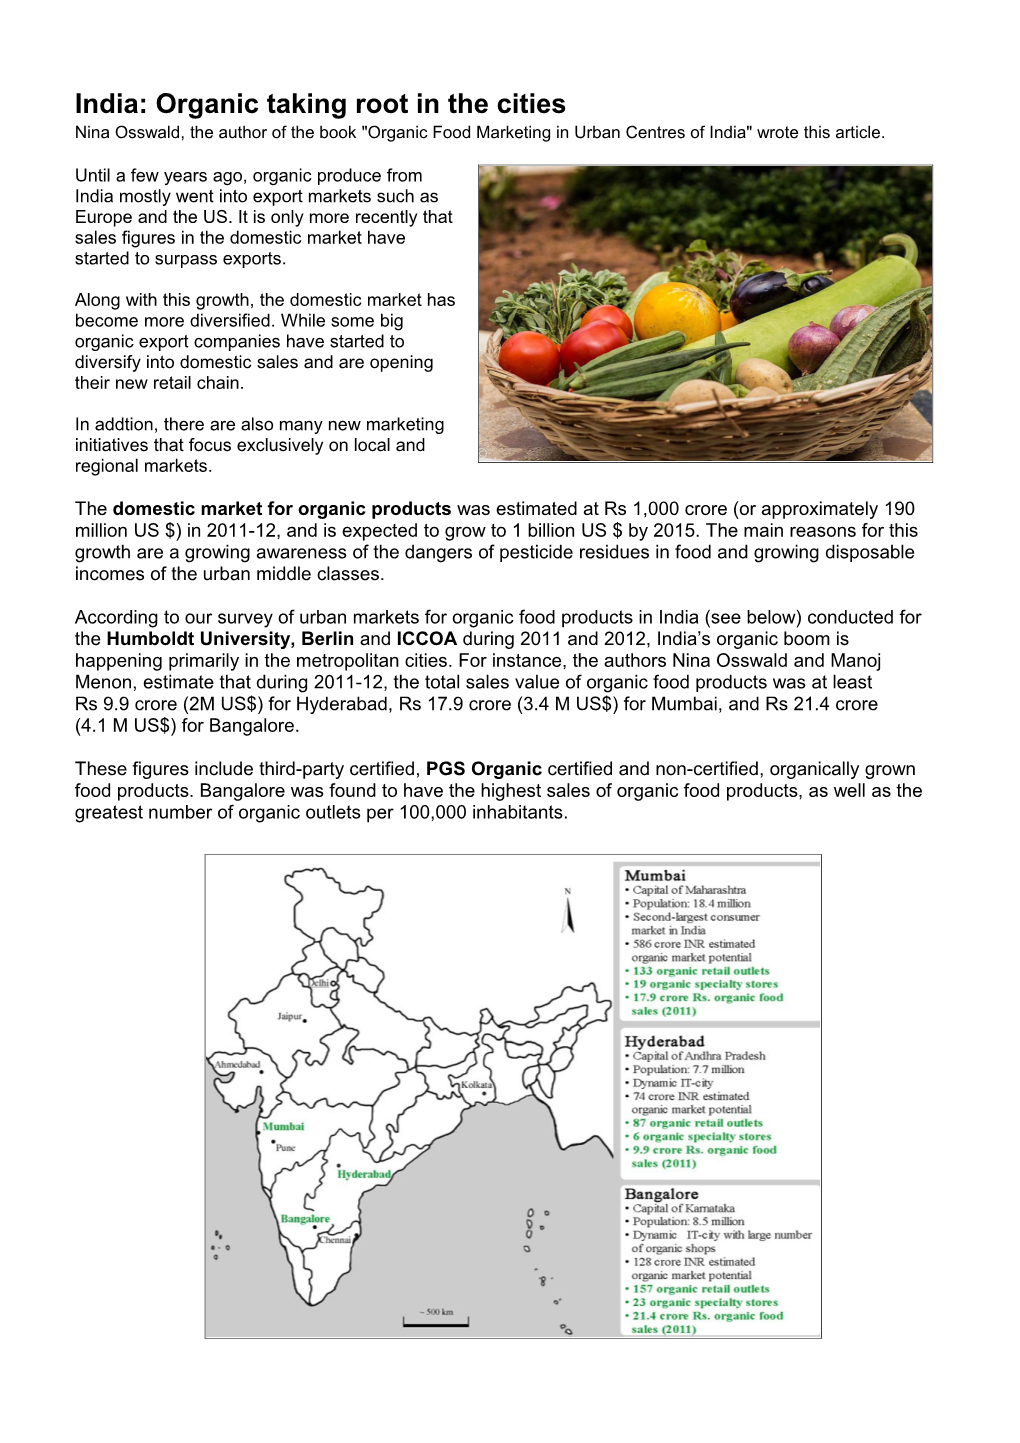 India: Organic Taking Root in the Cities